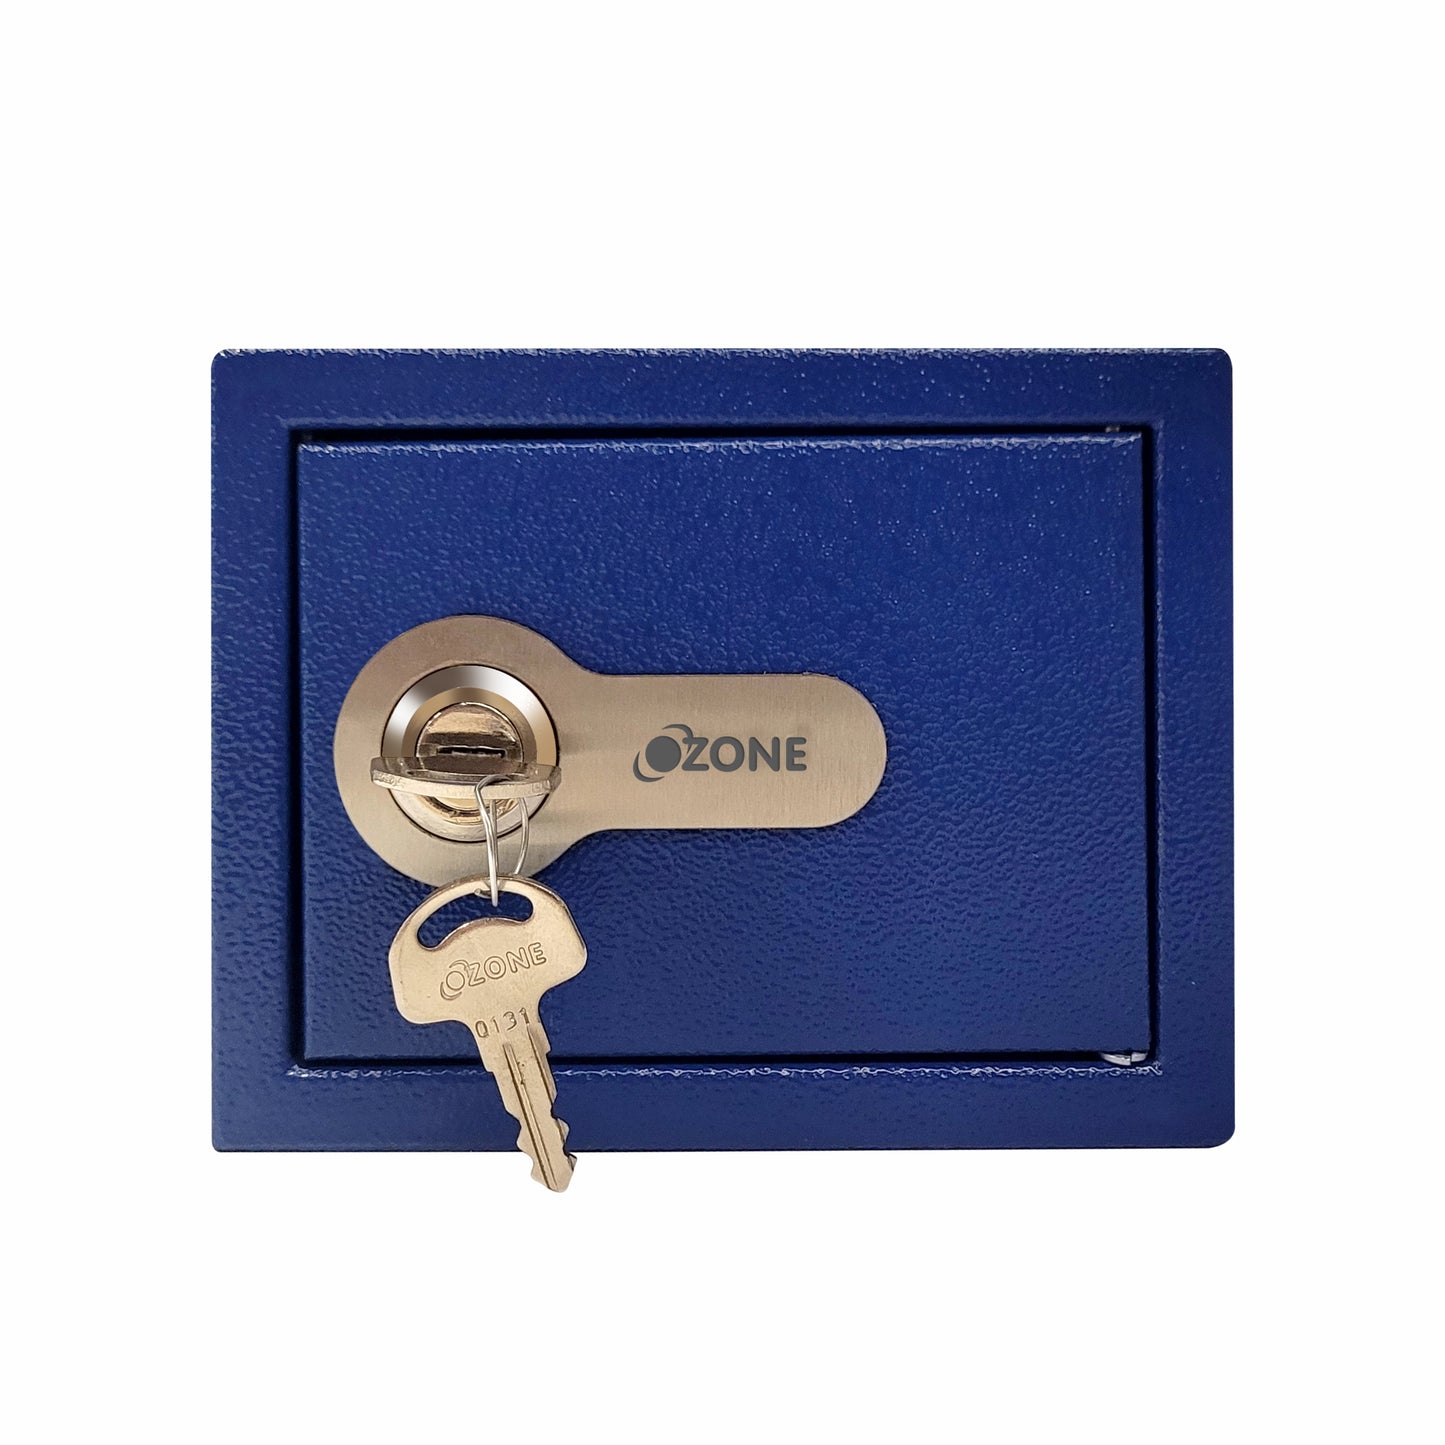 Ozone Money Bank | Compact Safe | 2 Litres